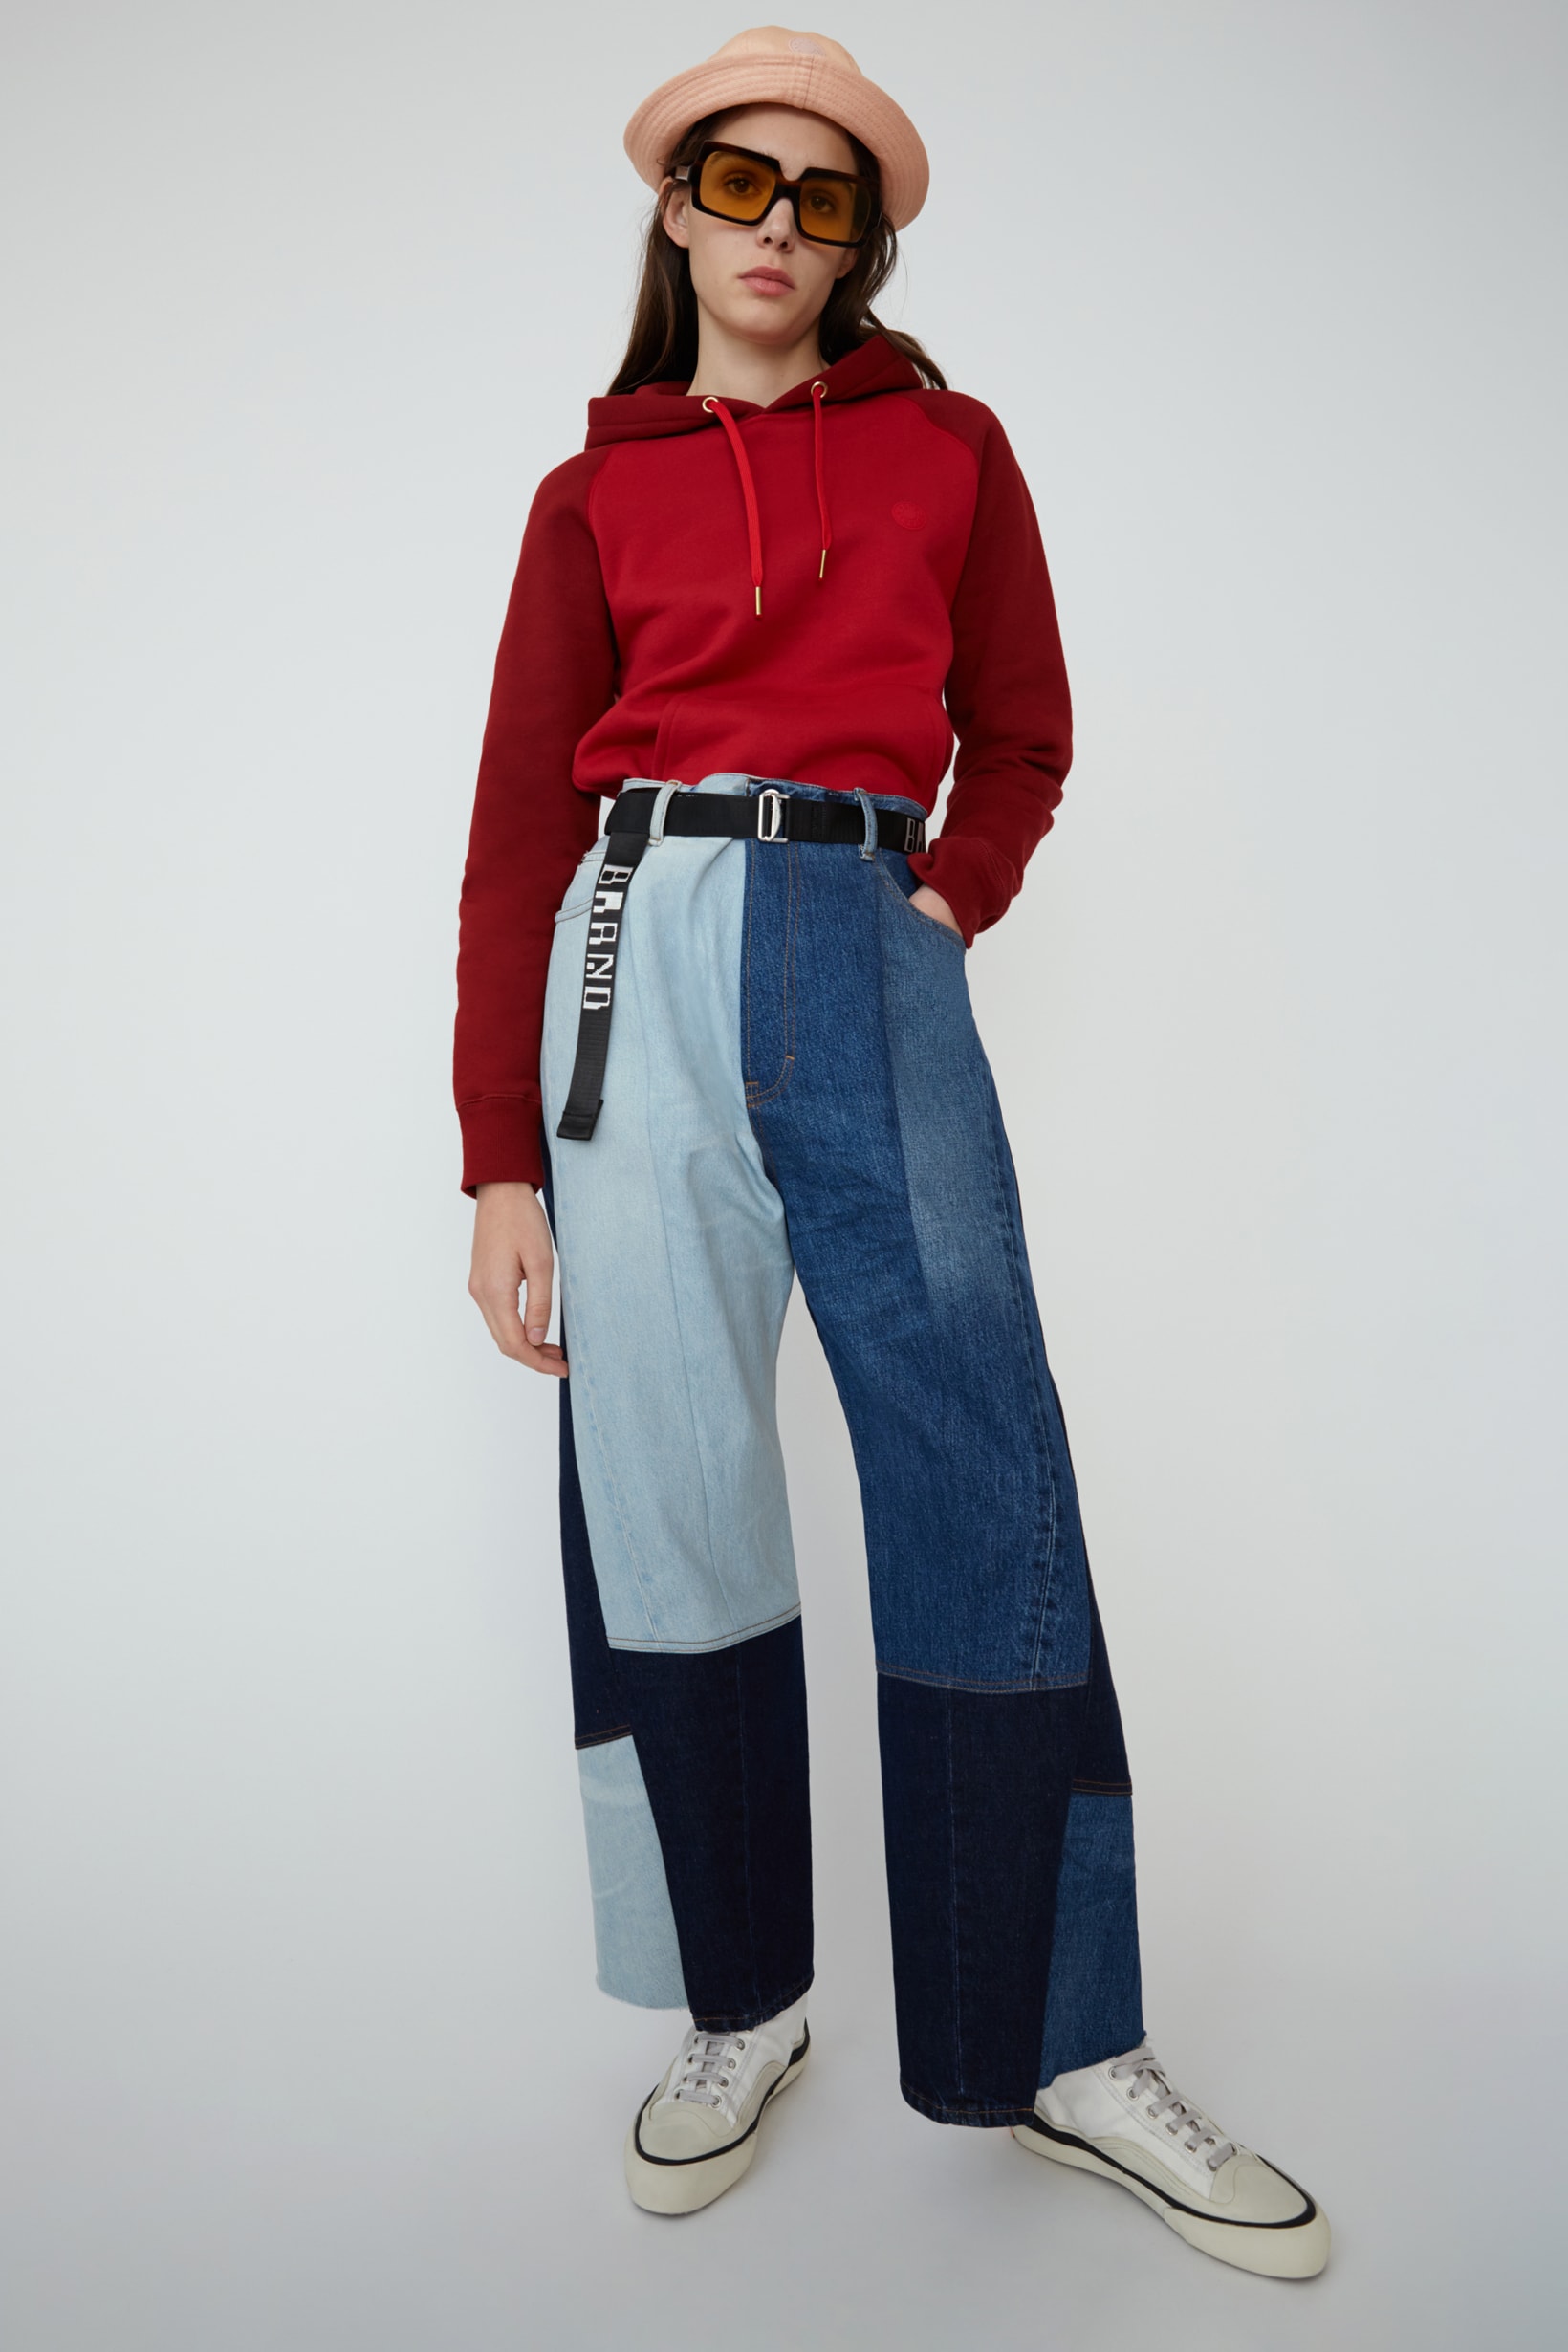 American Apparel Releases Denim SS19 Collection